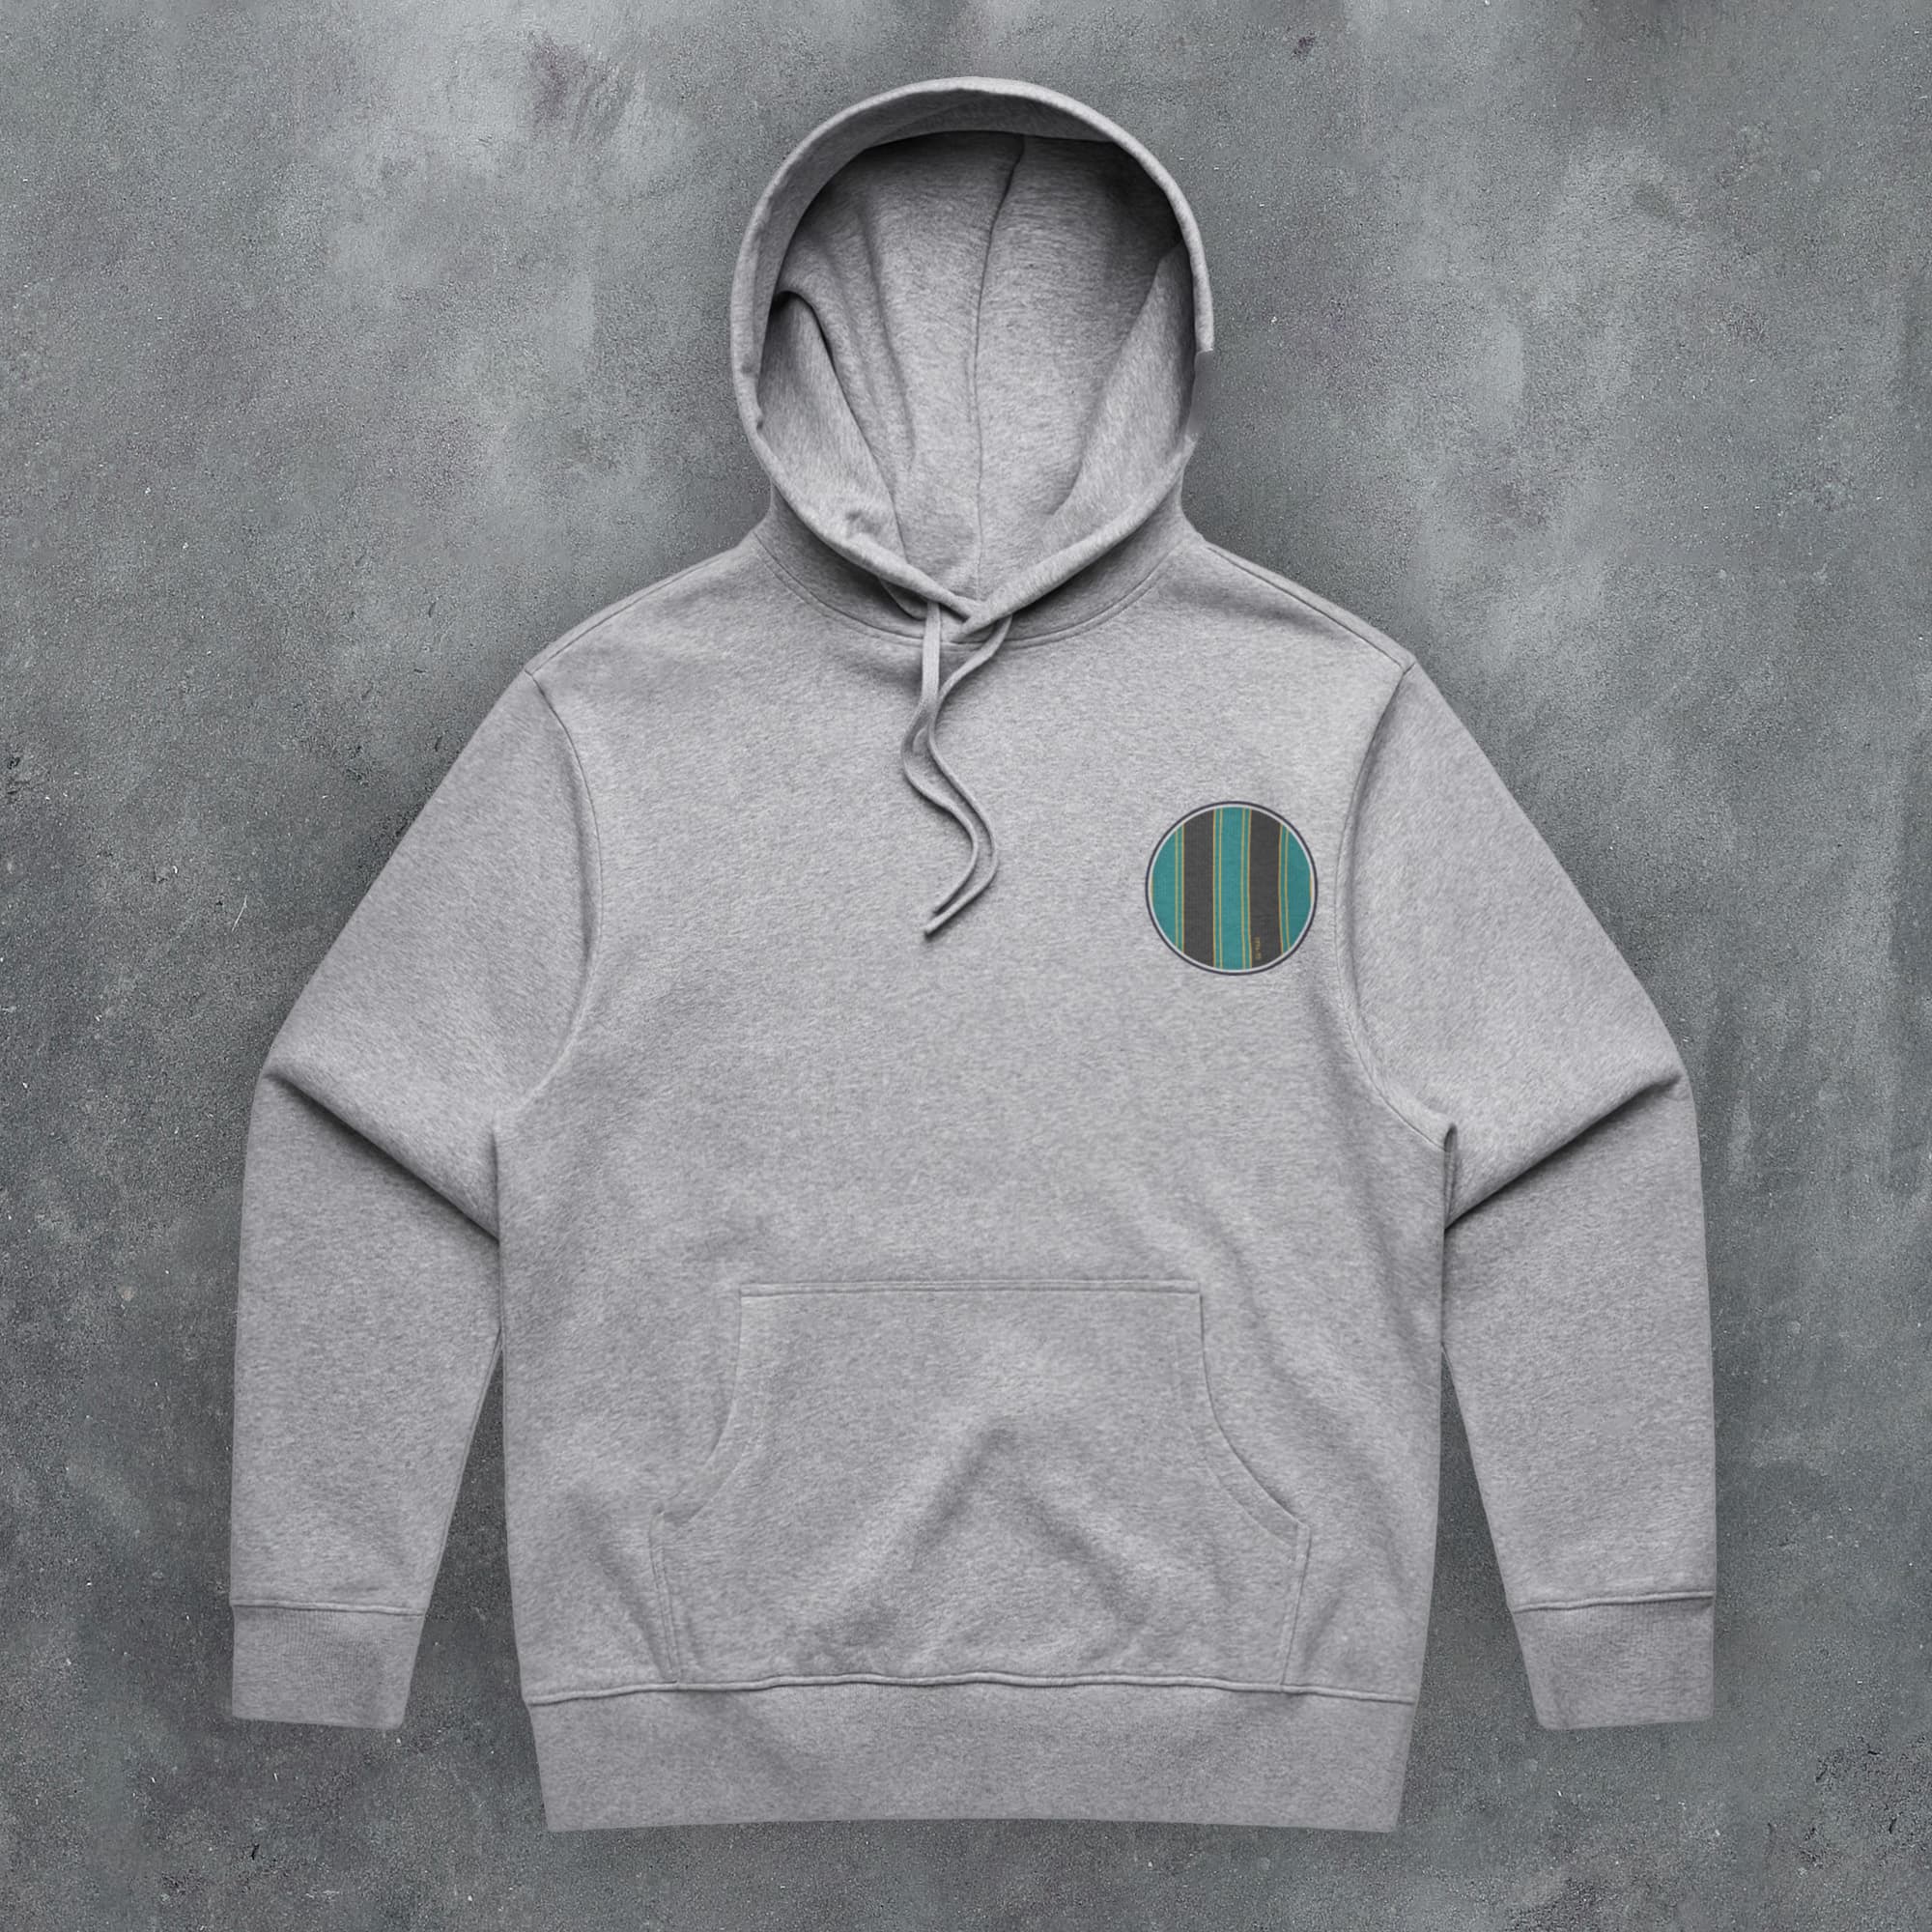 a grey hoodie with a green stripe on the side